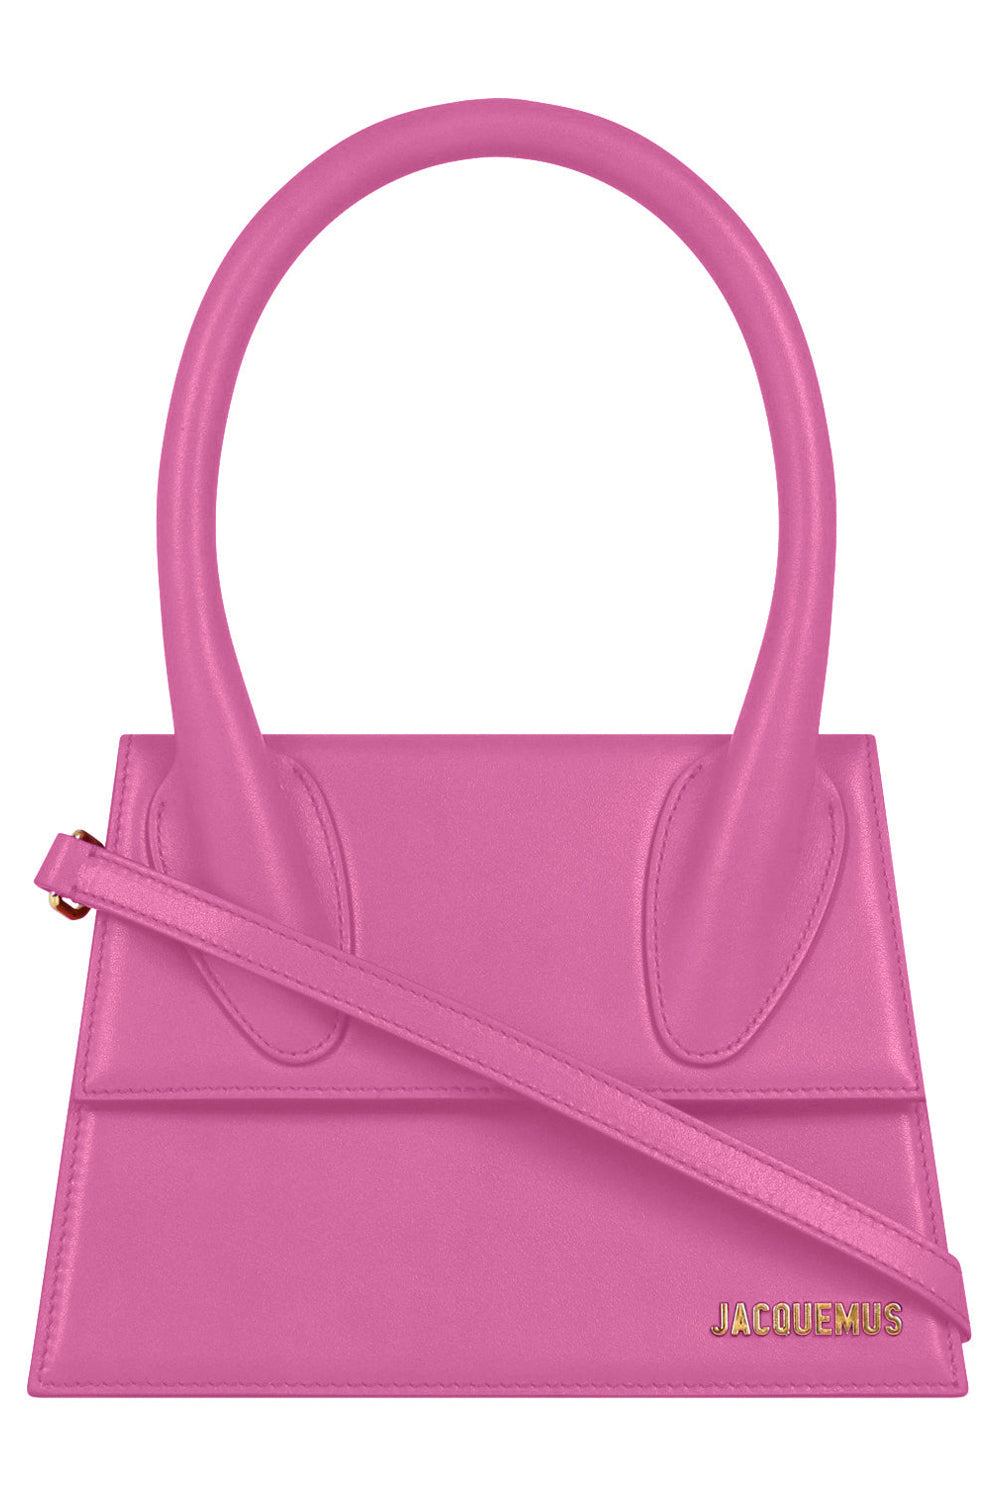 JACQUEMUS BAGS PINK LE GRAND CHIQUITO BAG | PINK